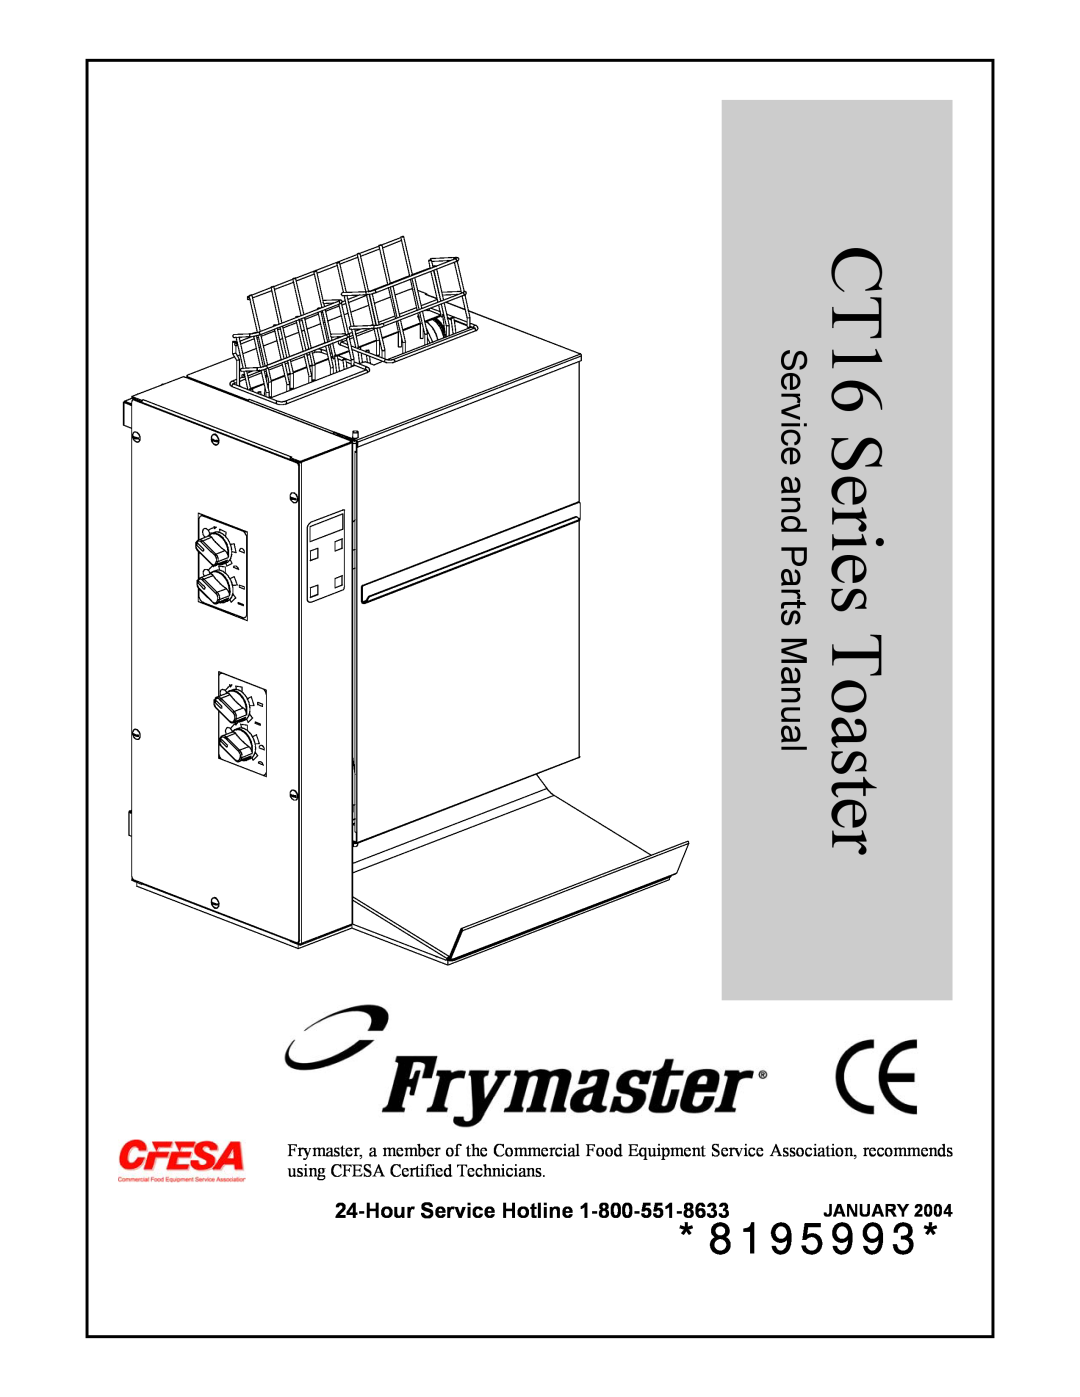 Frymaster CT16 Series manual Hour Service Hotline, Toaster, 8195993, Manual, Service and Parts, January 